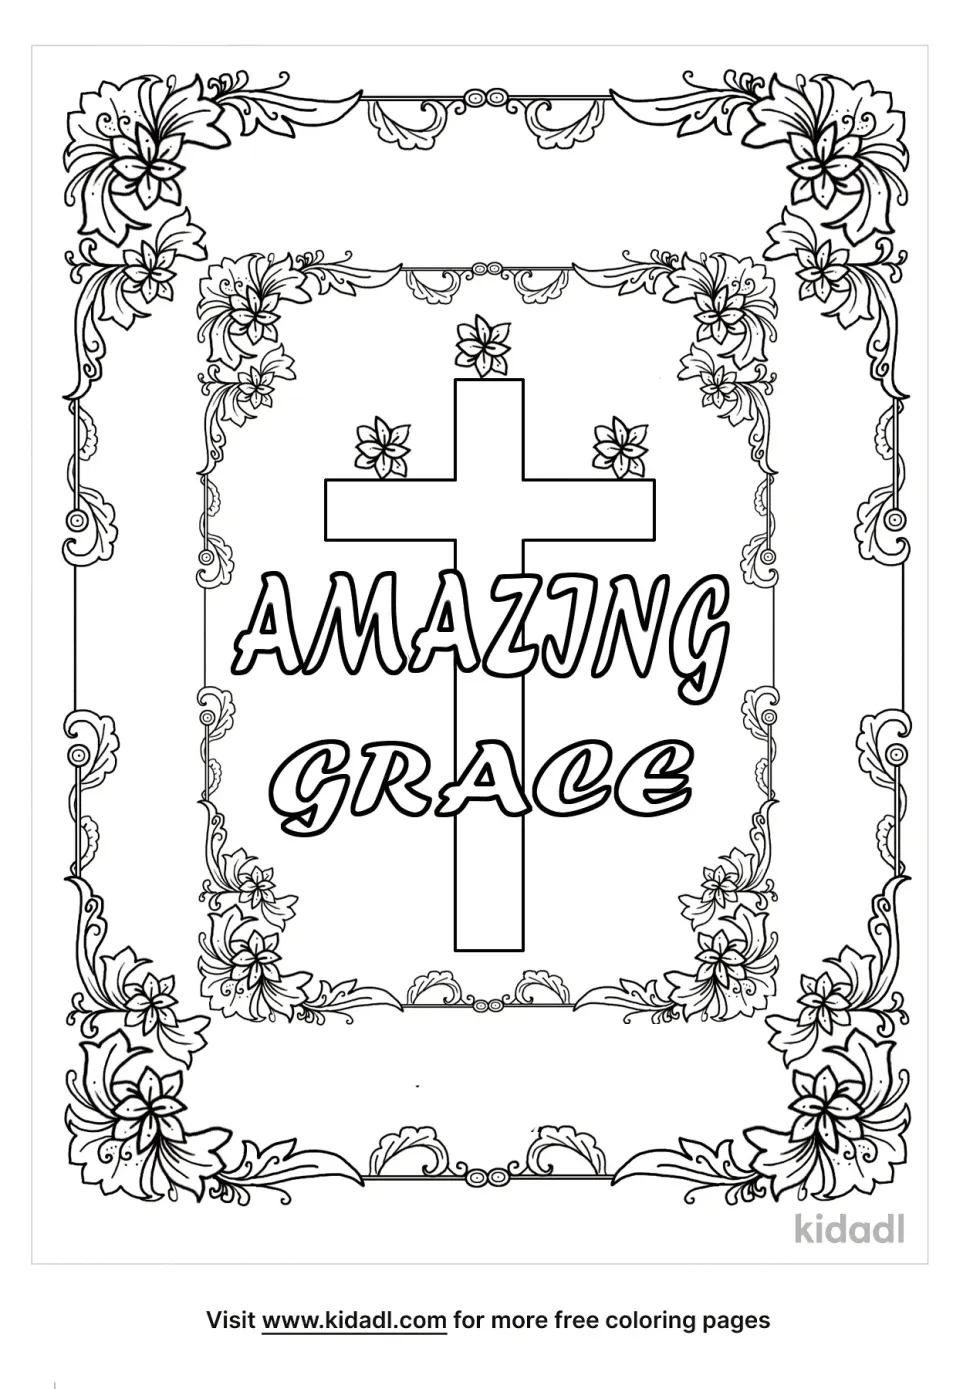 Amazing Grace Coloring Page